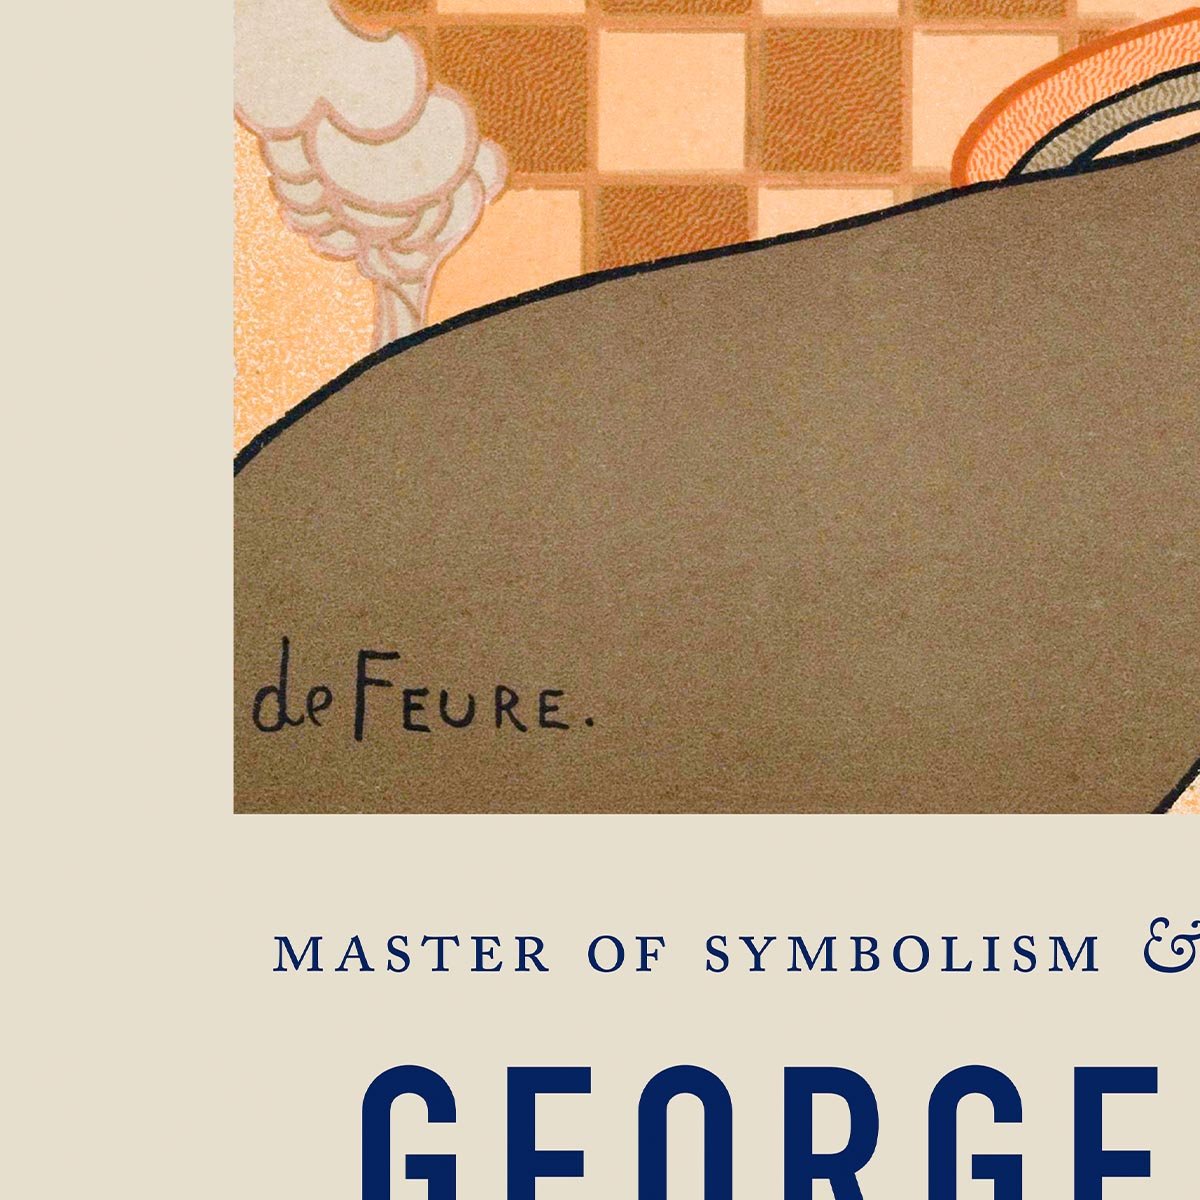 Georges de Feure New Year's Wish from Octave Poster